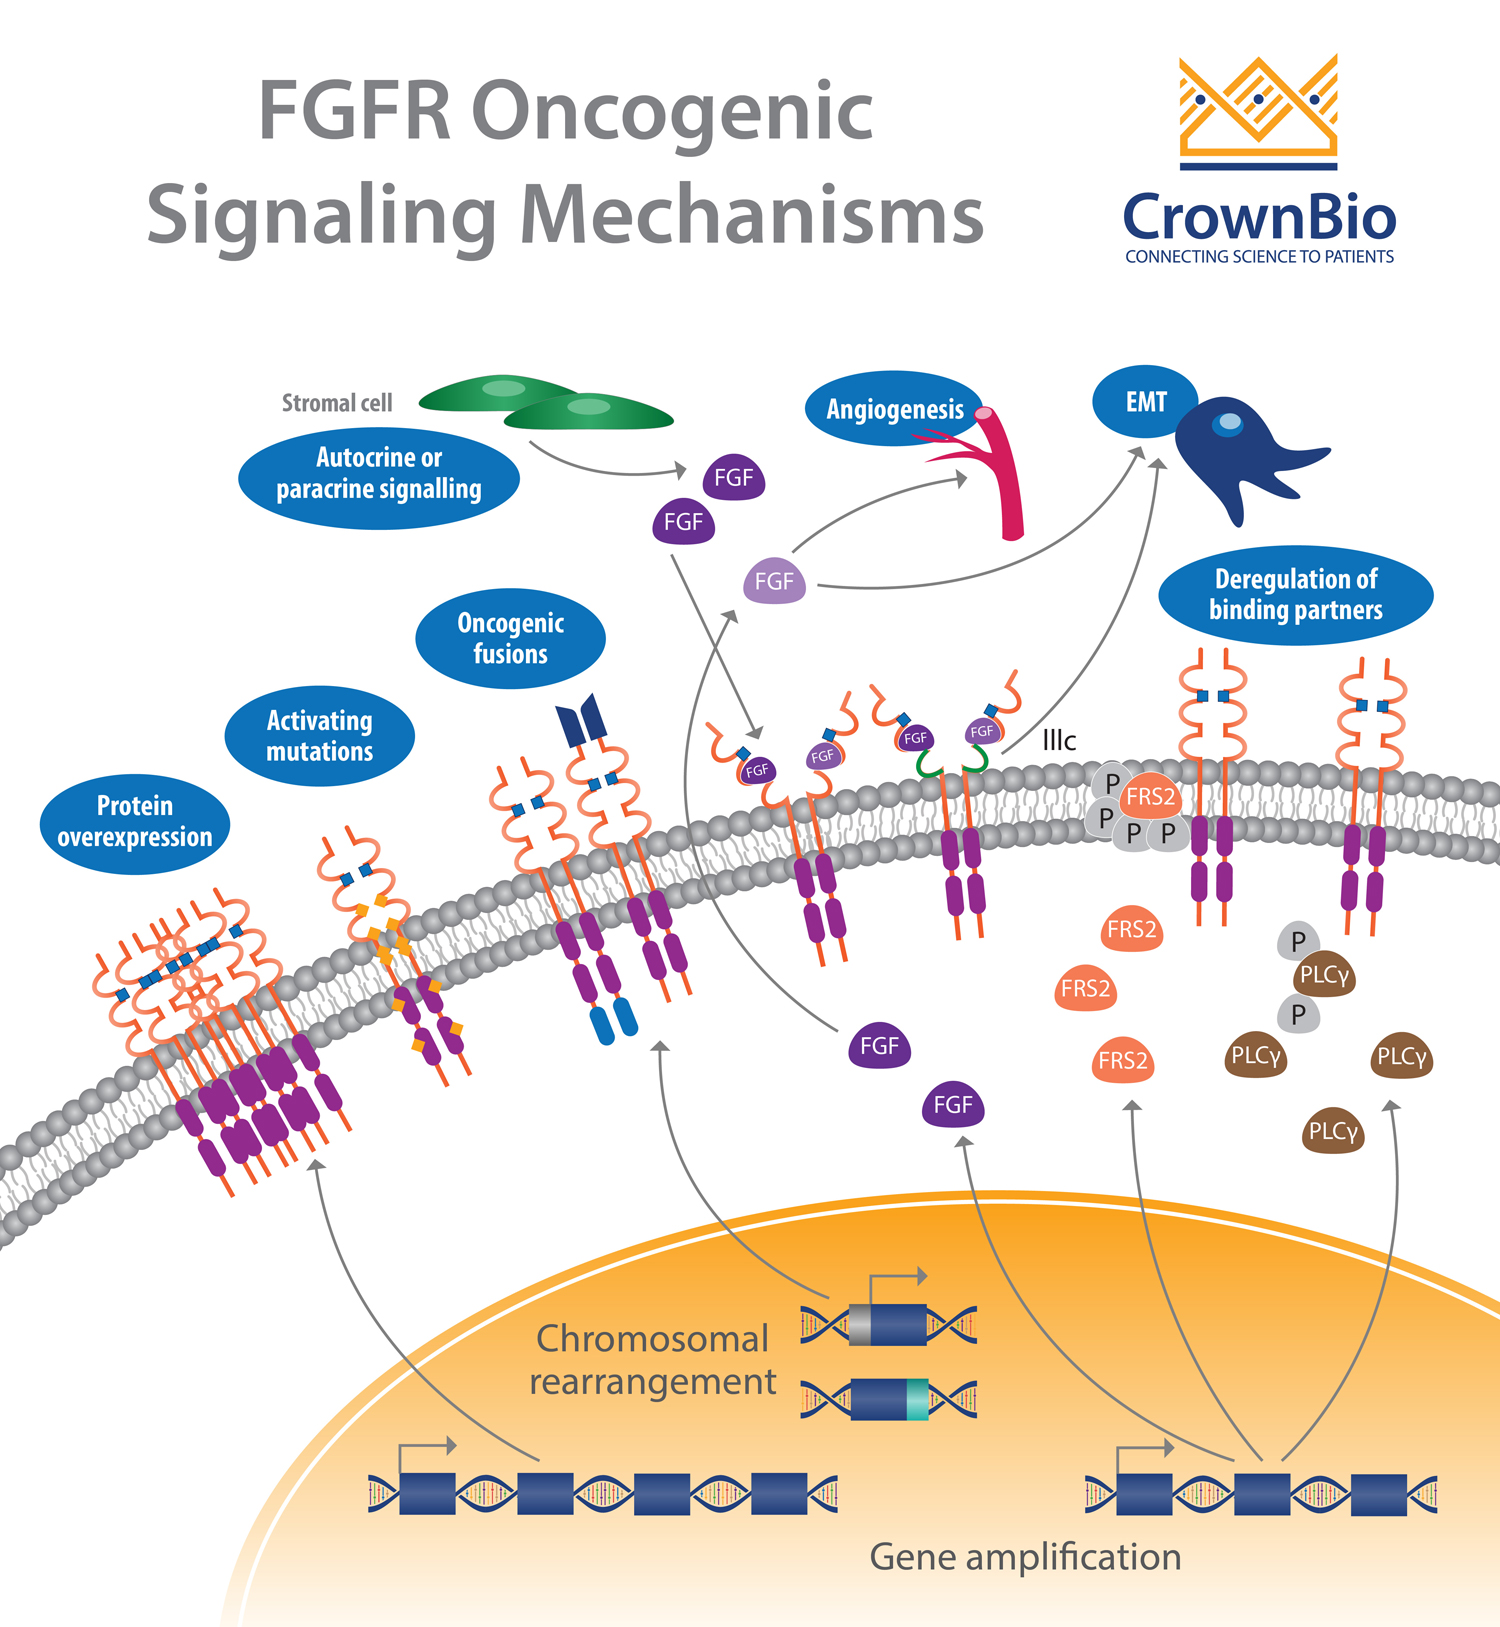 Targeting the FGF/FGFR Signaling Axis with PDX Models